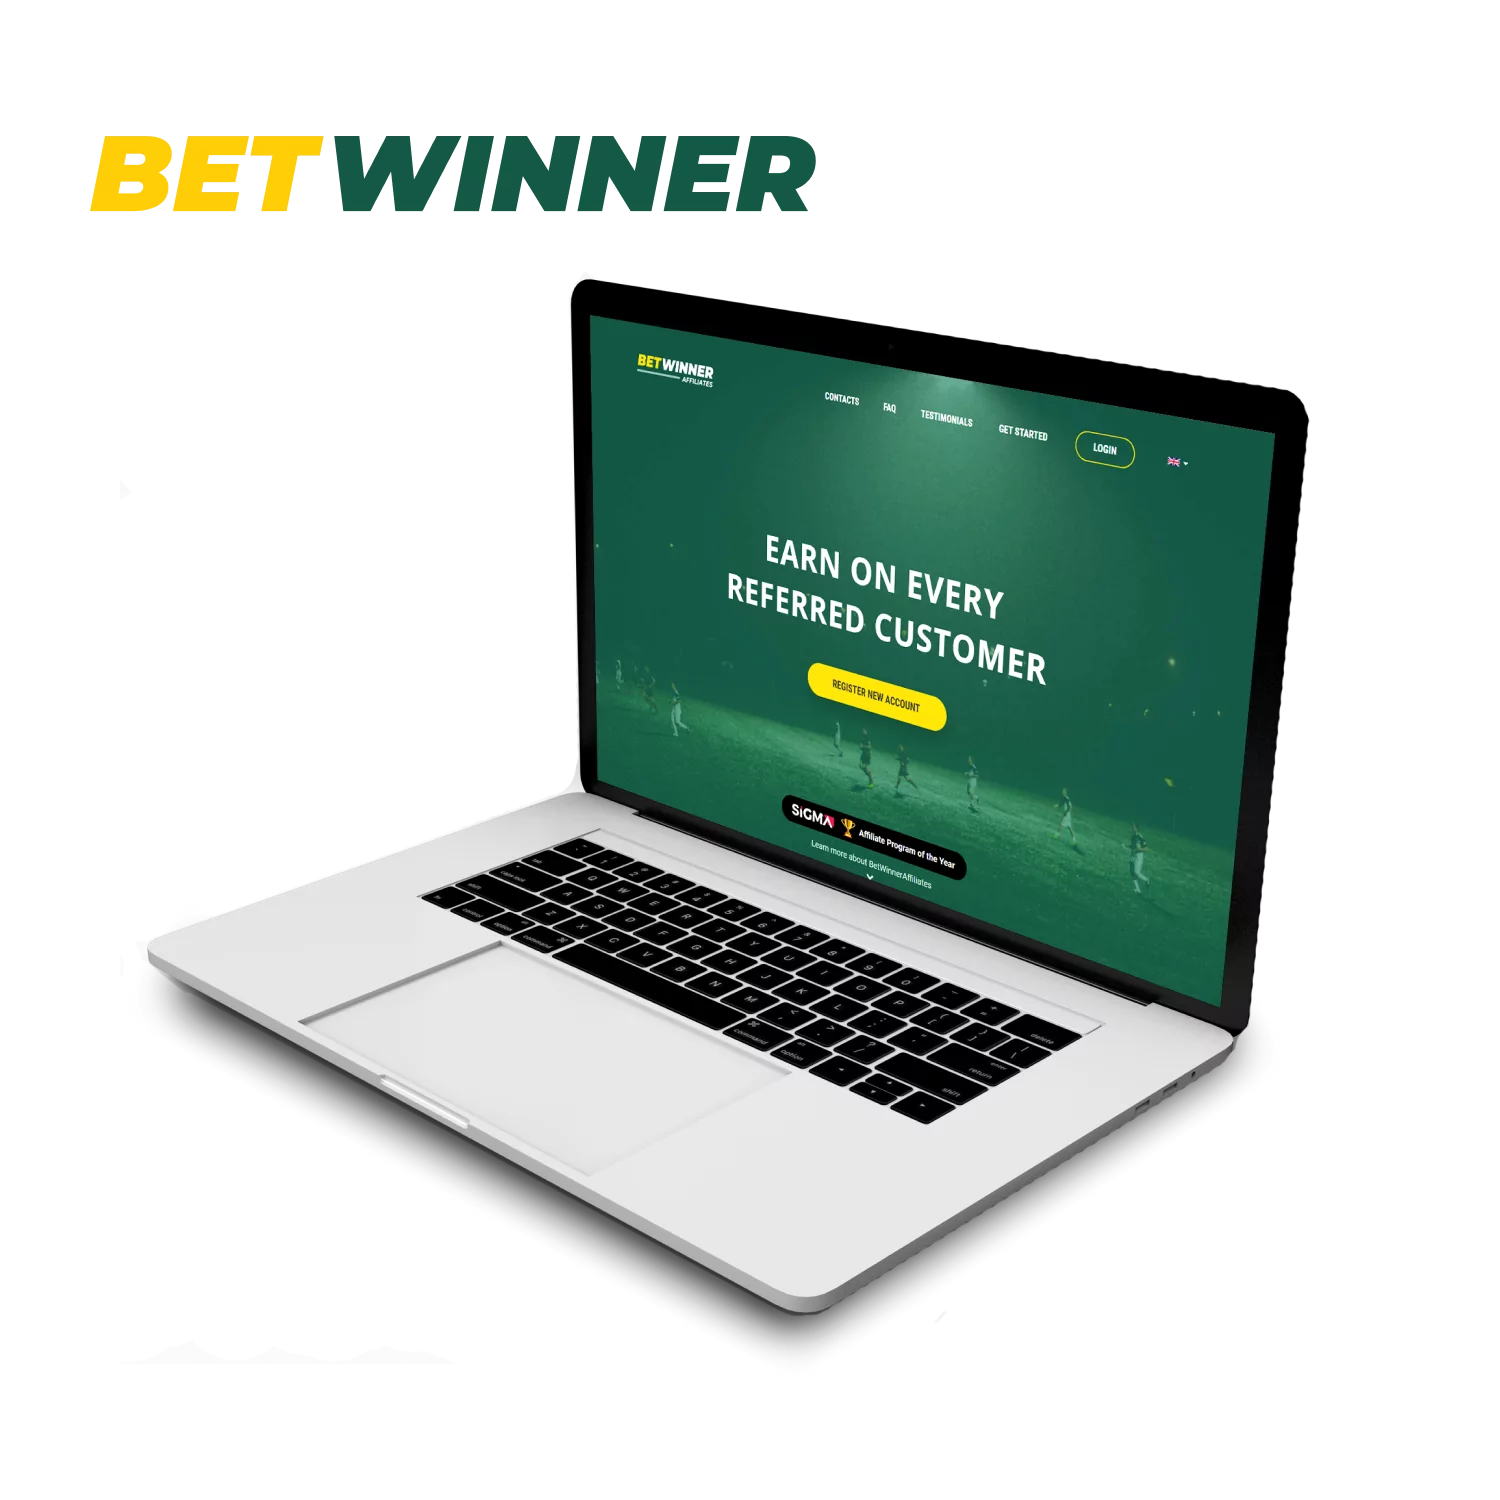 3 Reasons Why Having An Excellent affiliation BetWinner Isn't Enough